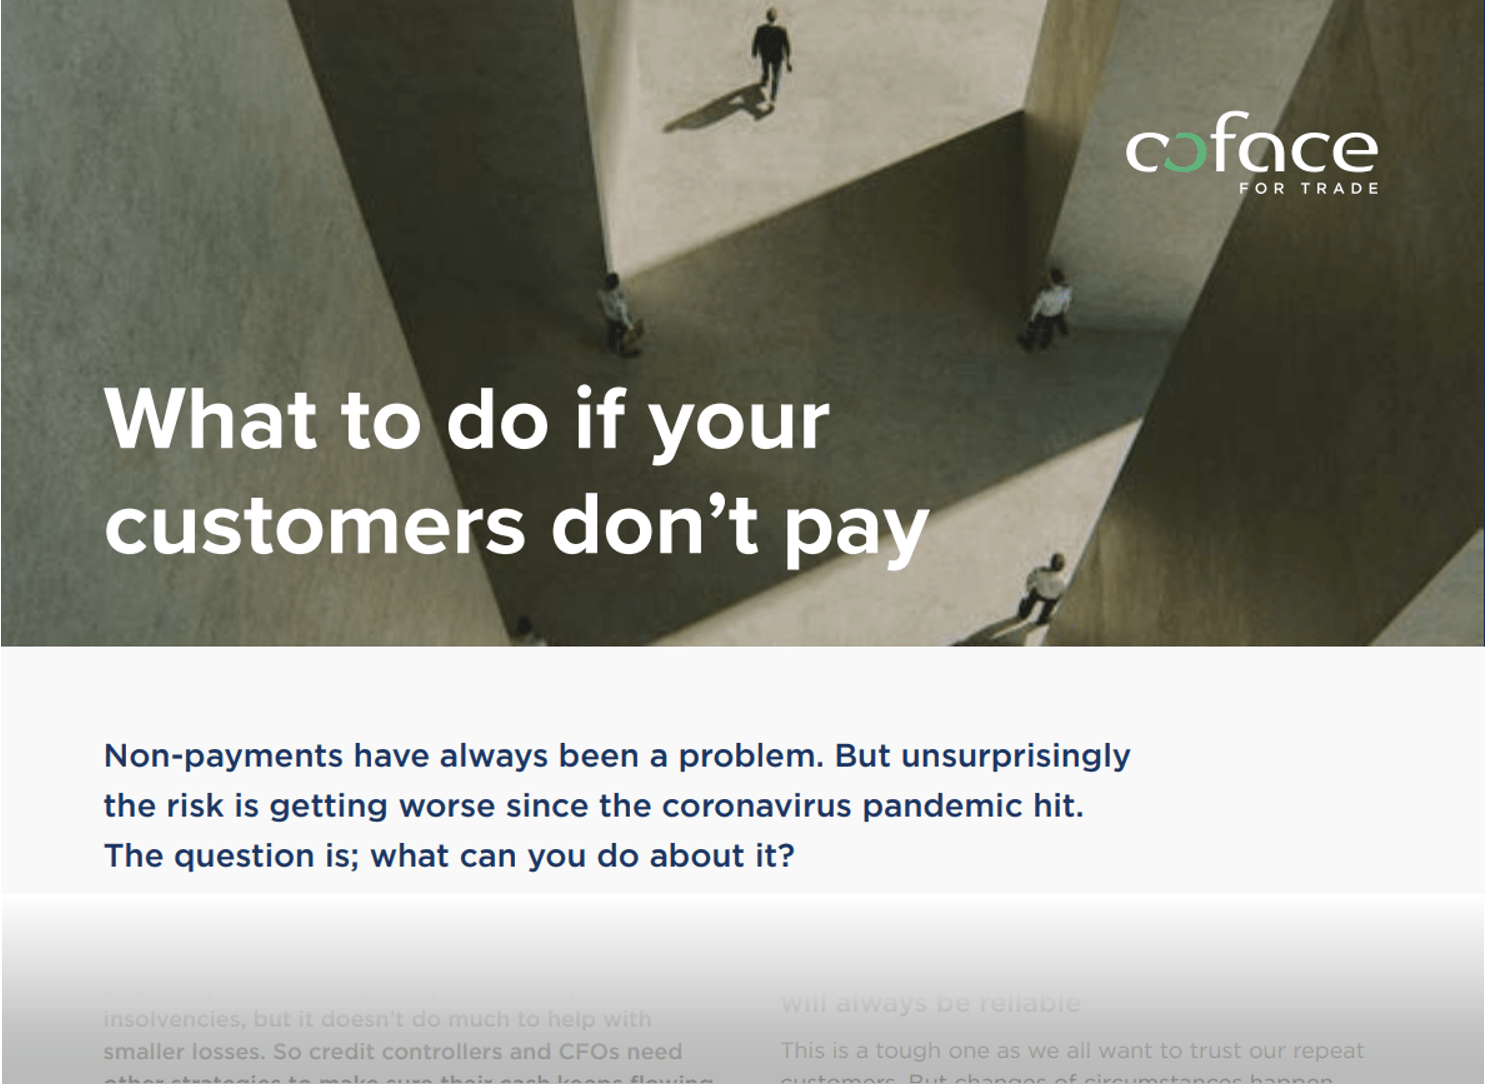 What to do if your customers don't pay